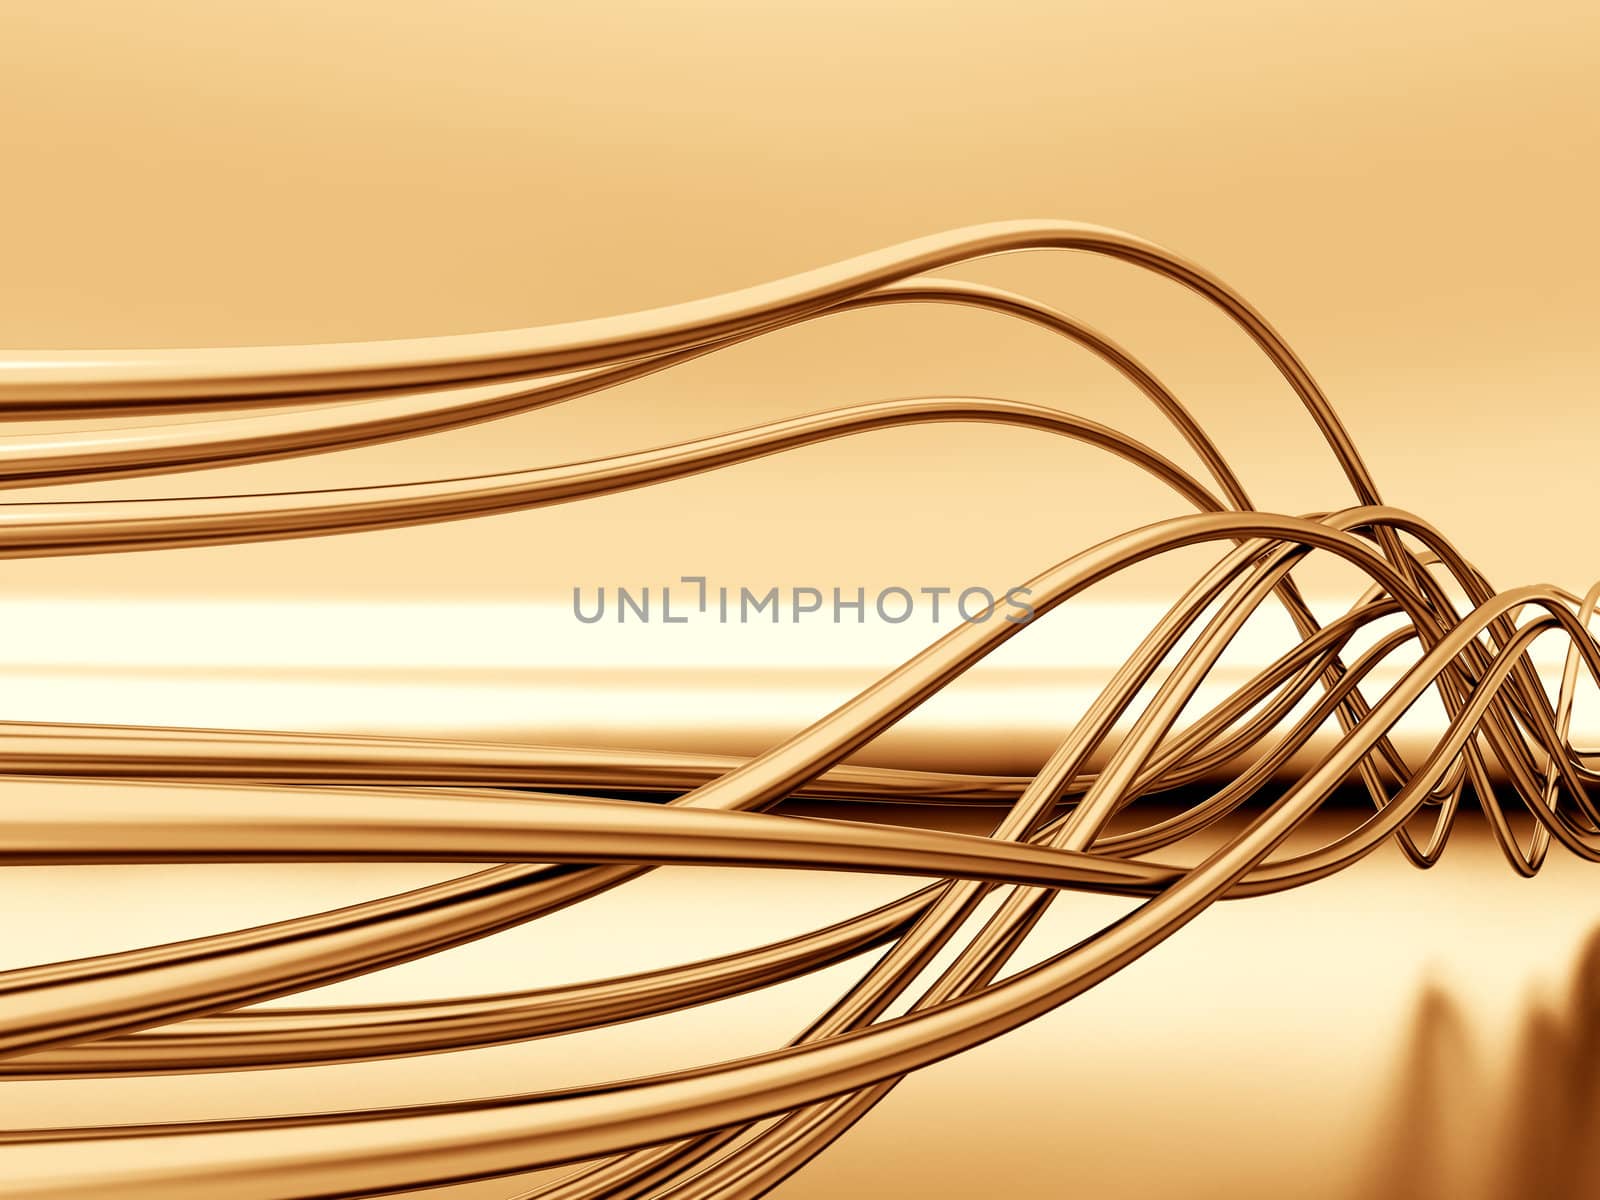 fibre-optical metal cables on a reflective background by Serp